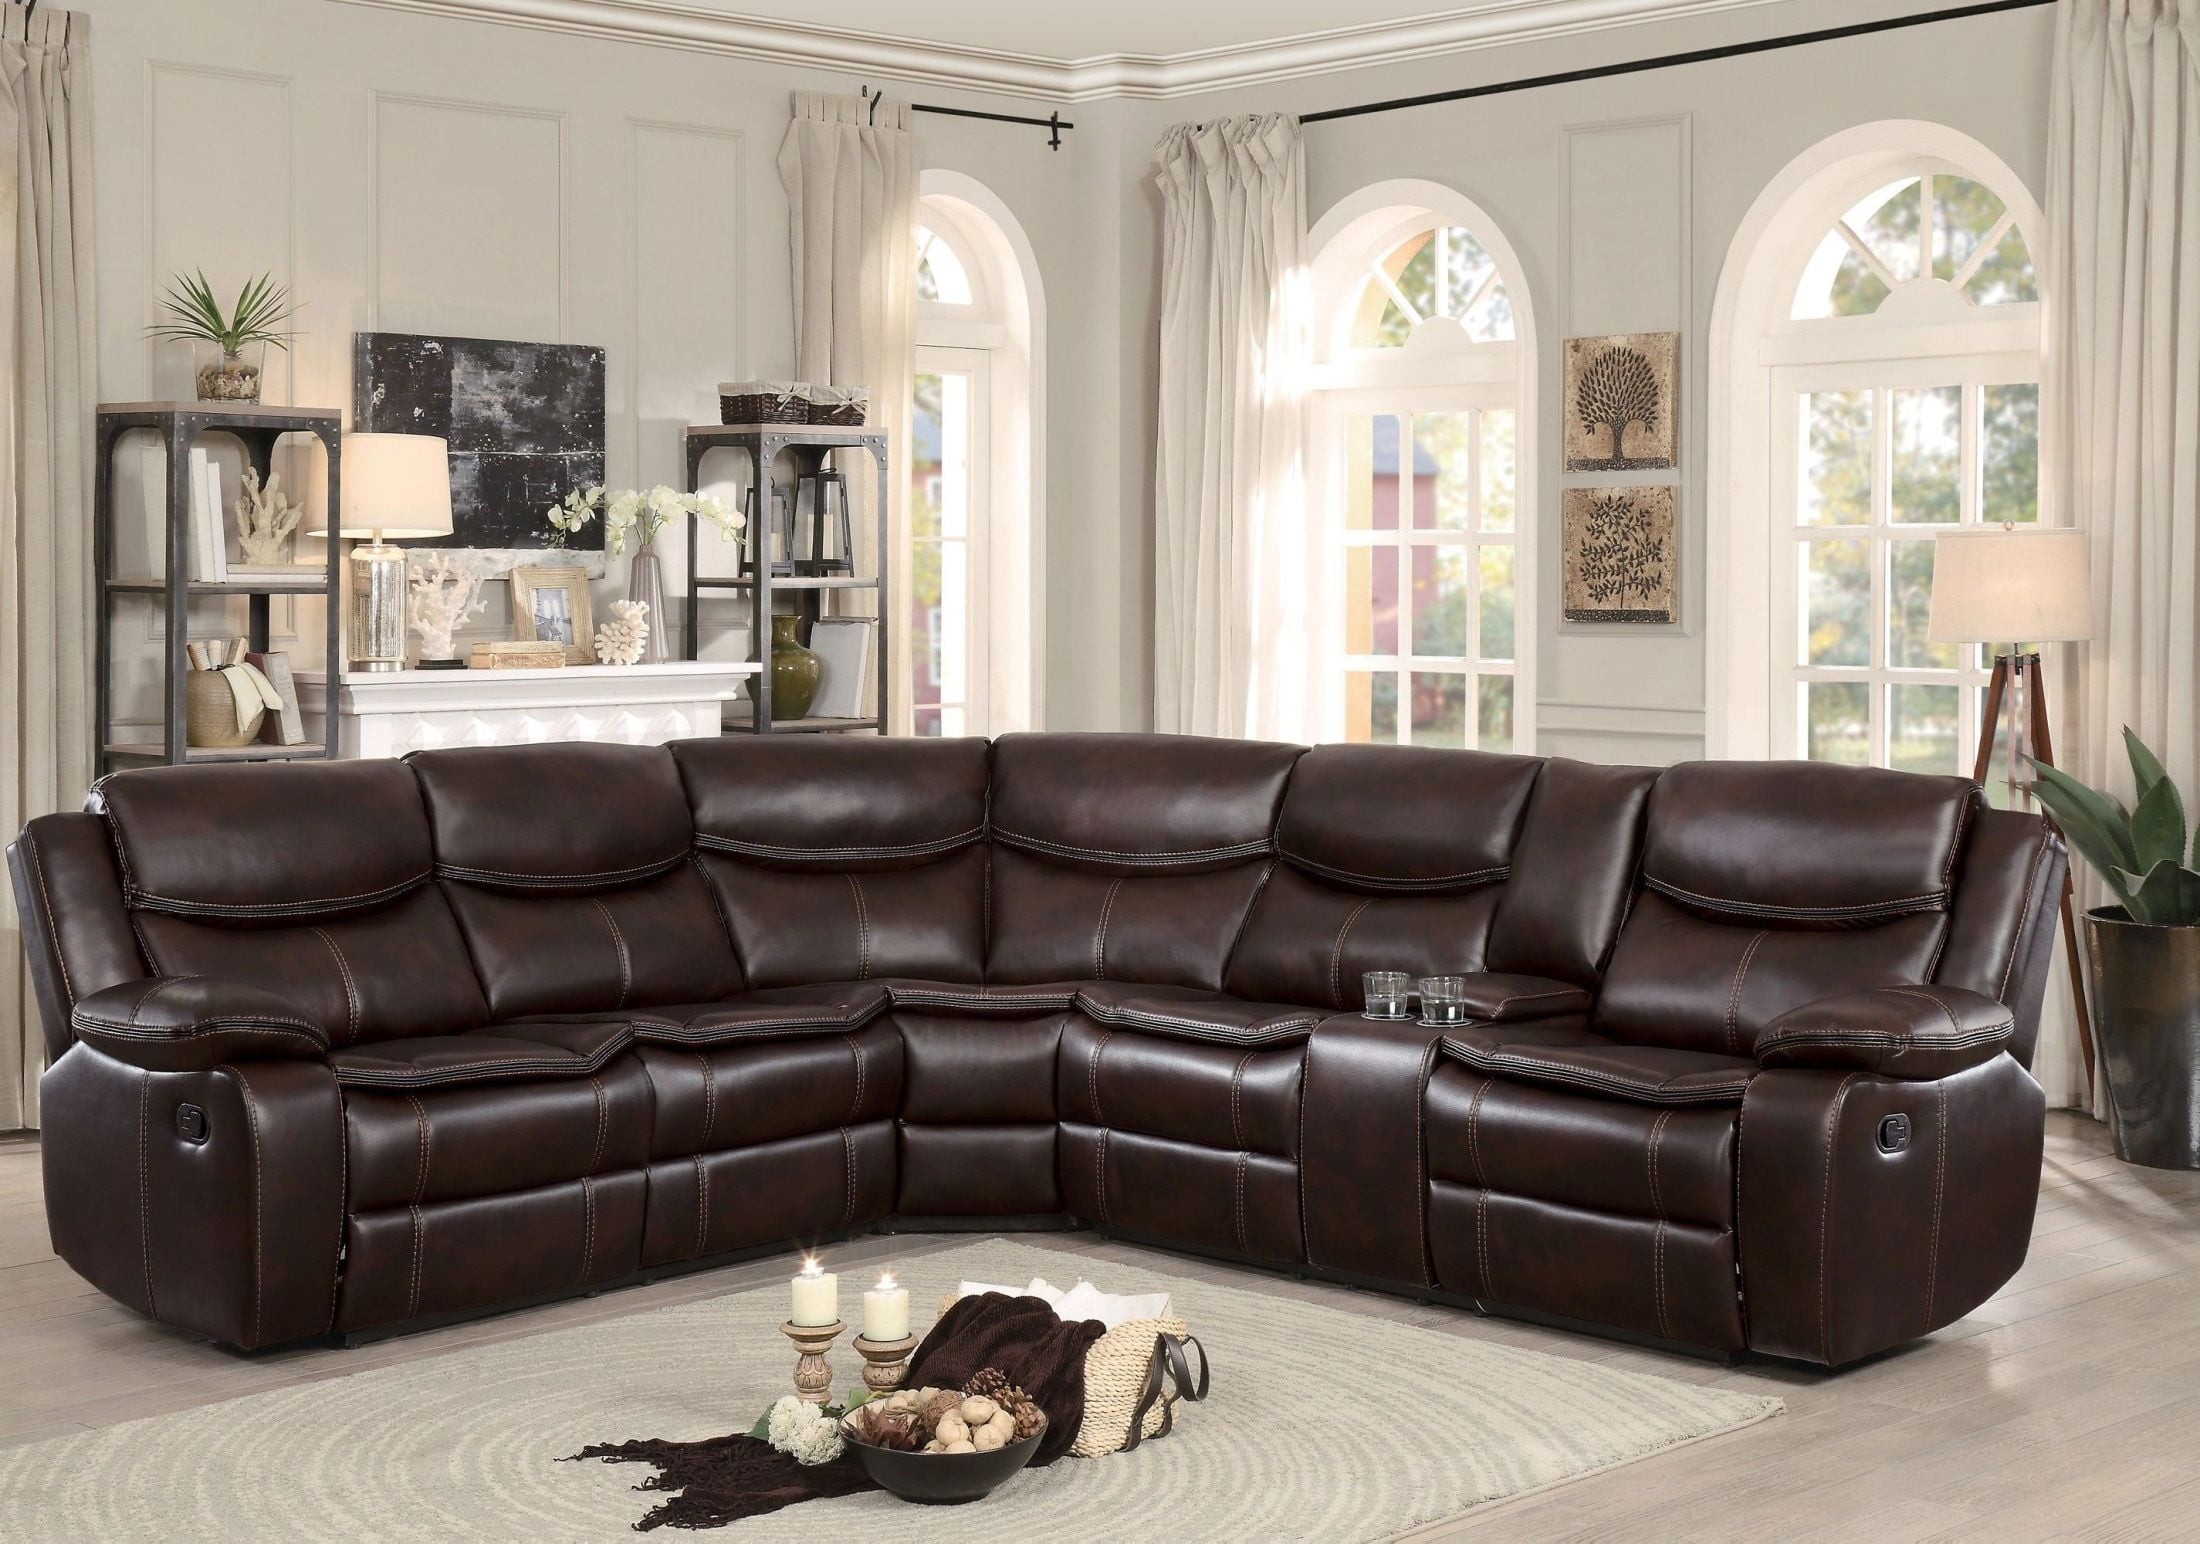 Bastrop Brown Leather Reclining, Brown Leather Sectional With Recliners